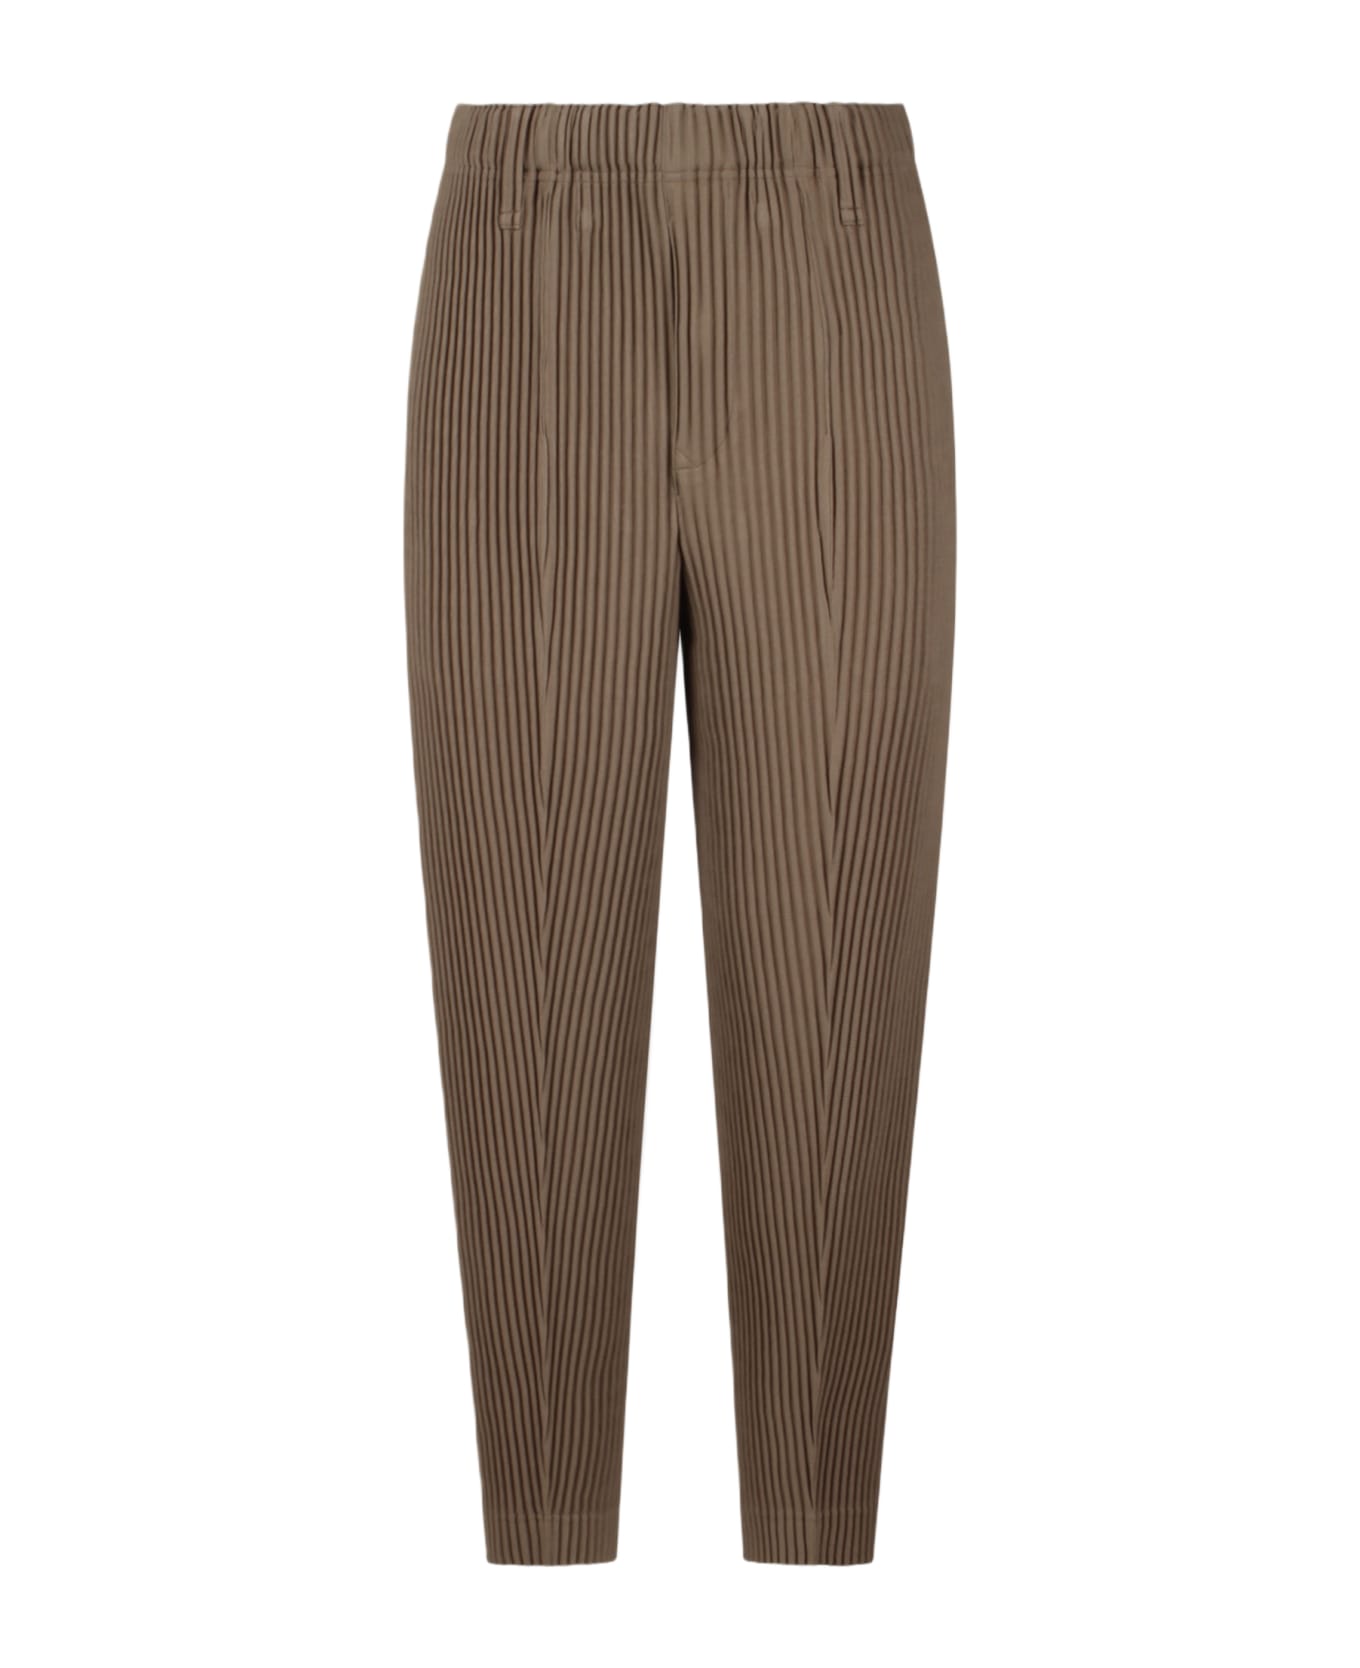 Homme Plissé Issey Miyake Compleat Trousers - Brown ボトムス